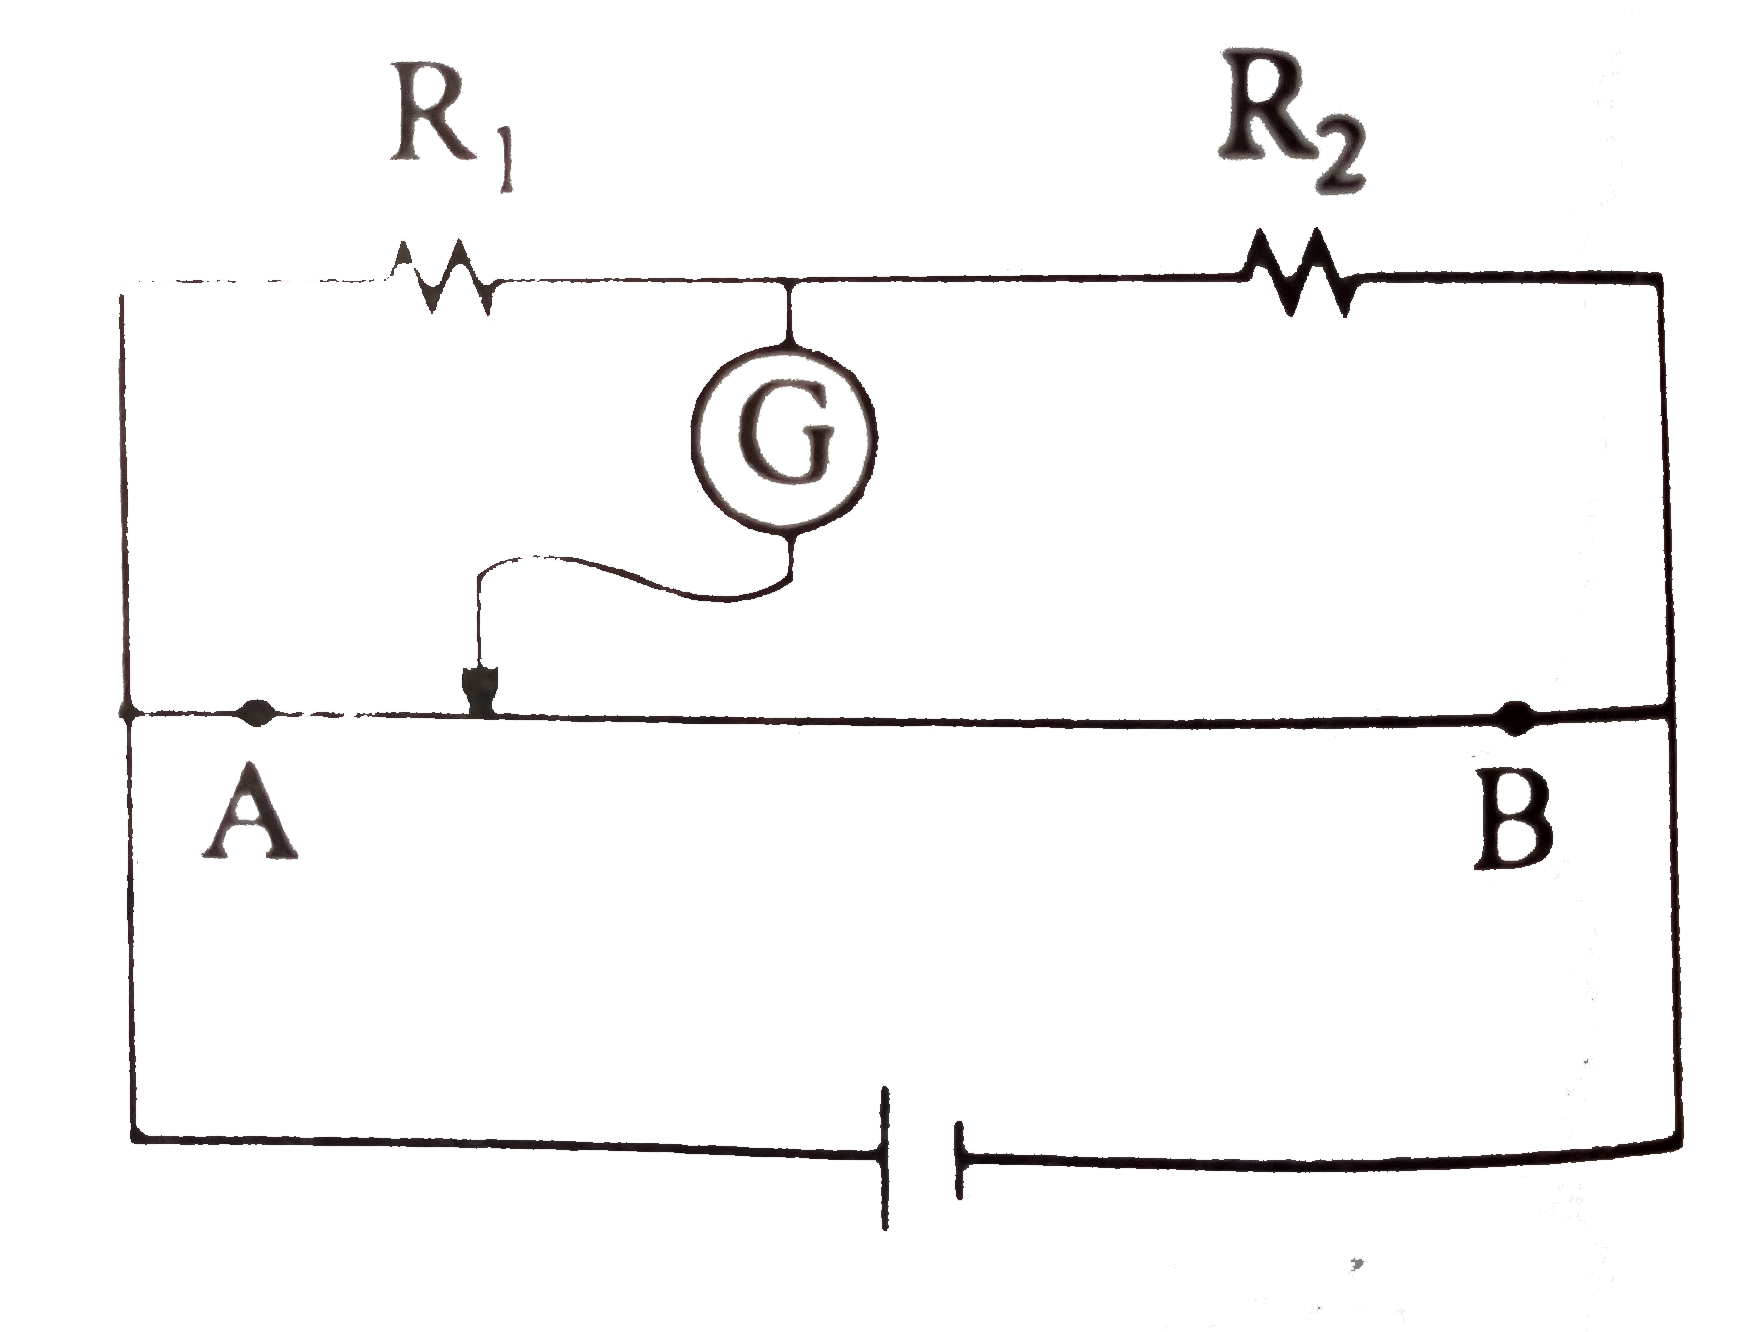 In the figure shown for given values of R1 and R2 the balance point for Jockey is at 40cm from A. When R2 is shunted by a resistance of 10Omega, balance shifts to 50cm. R1 and R2 are (AB=1m):